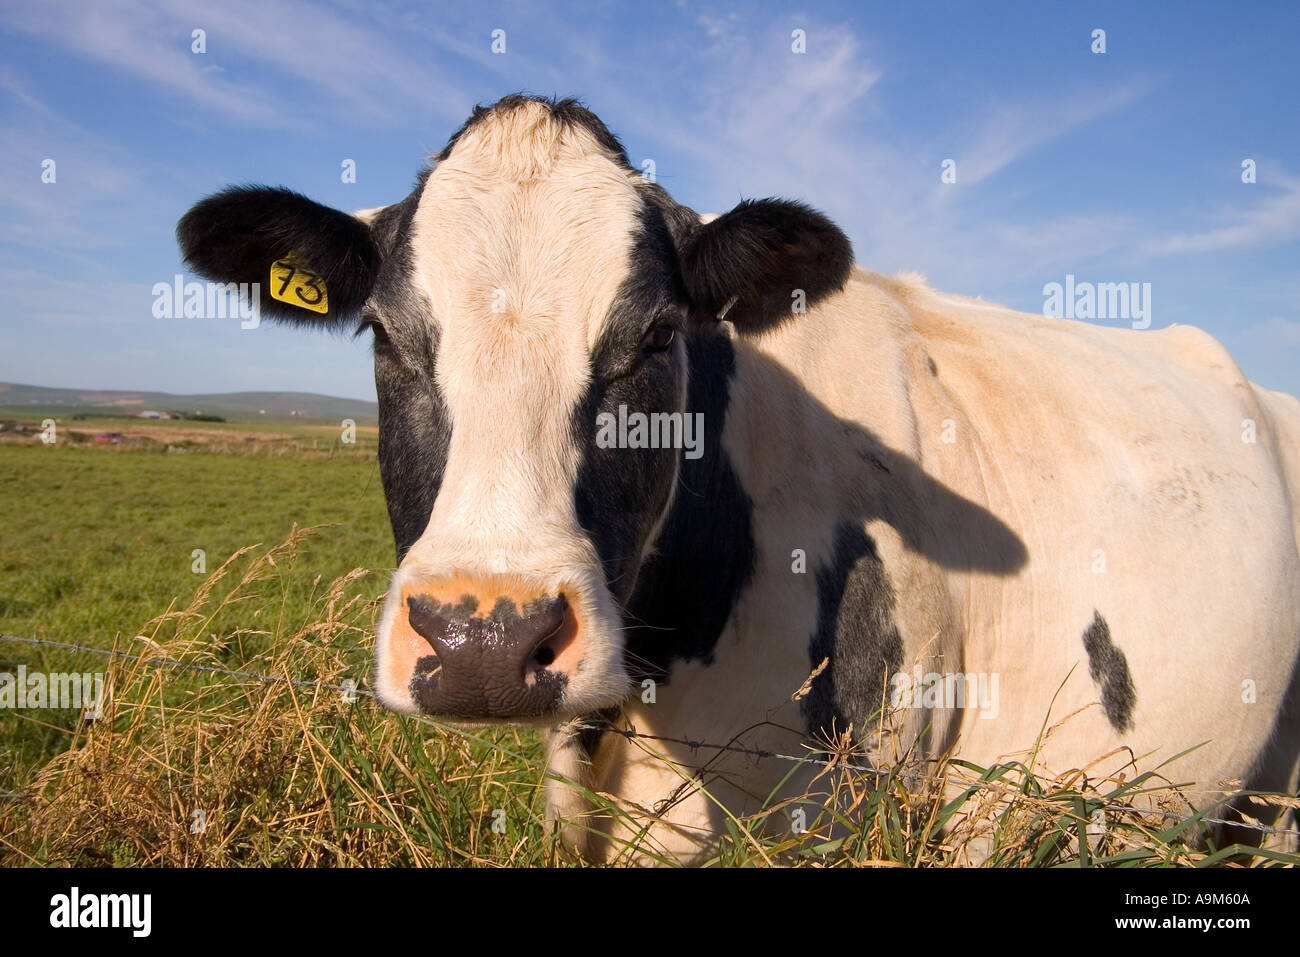 dh Cow ANIMALS UK Beef cow in field Harray Orkney face livestock farm animal head close up Stock Photo